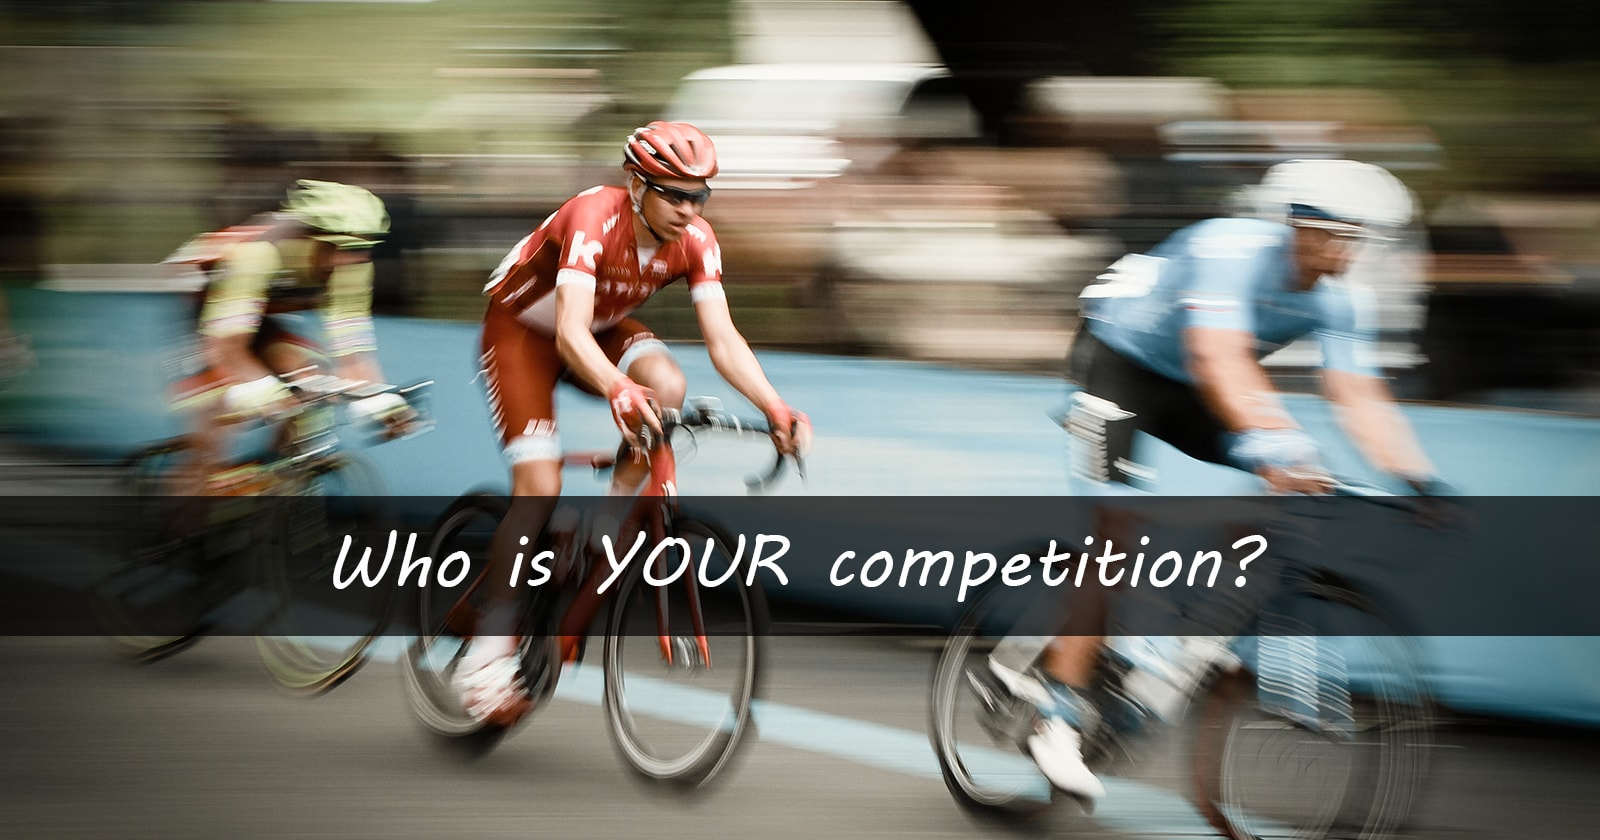 Think You Know Who Your Competition Is? Think Again!